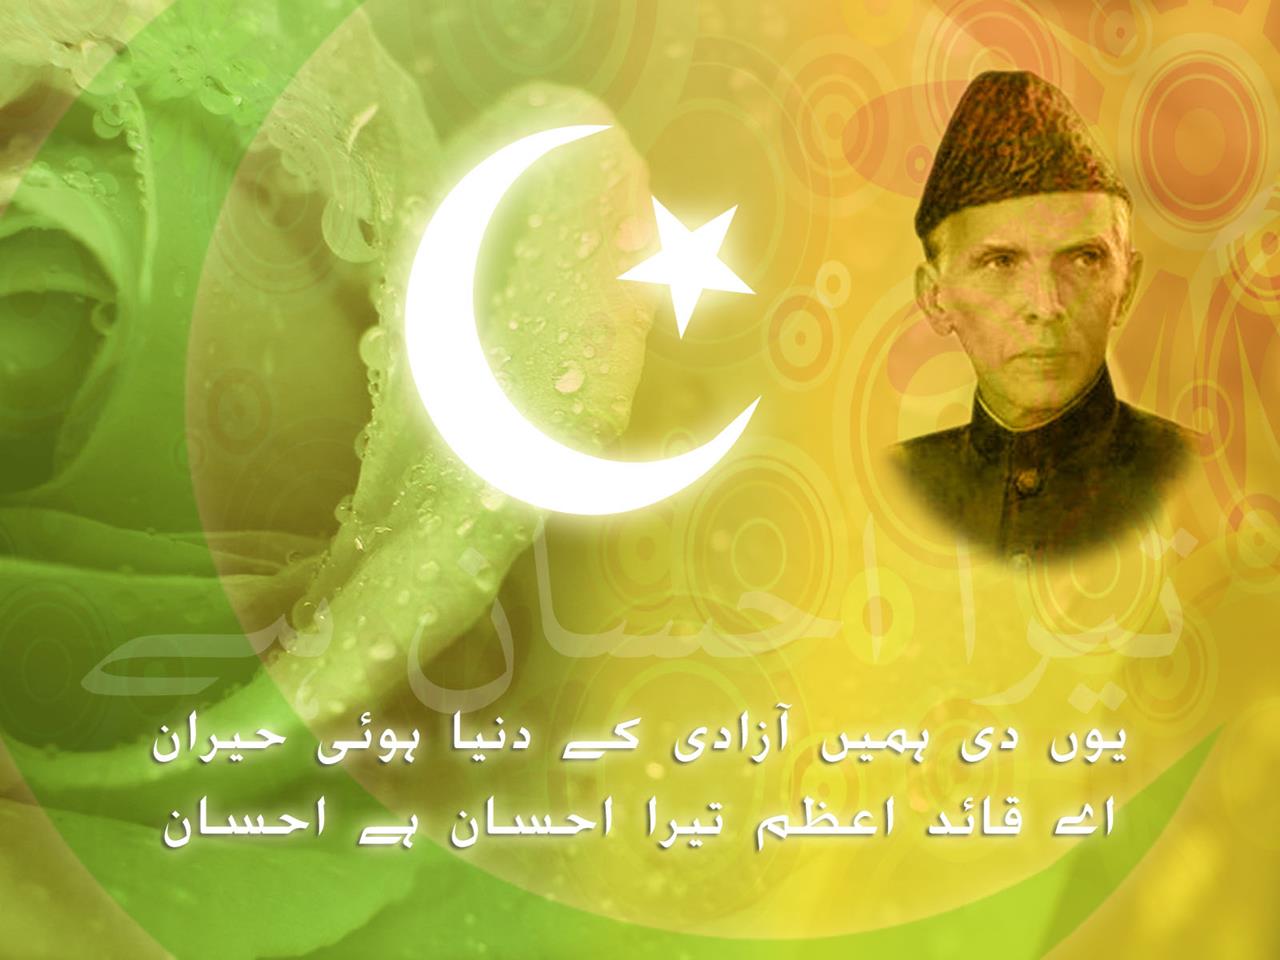 Happy Quaid Day Messages And Wallpapers - 25 December - XciteFun.net